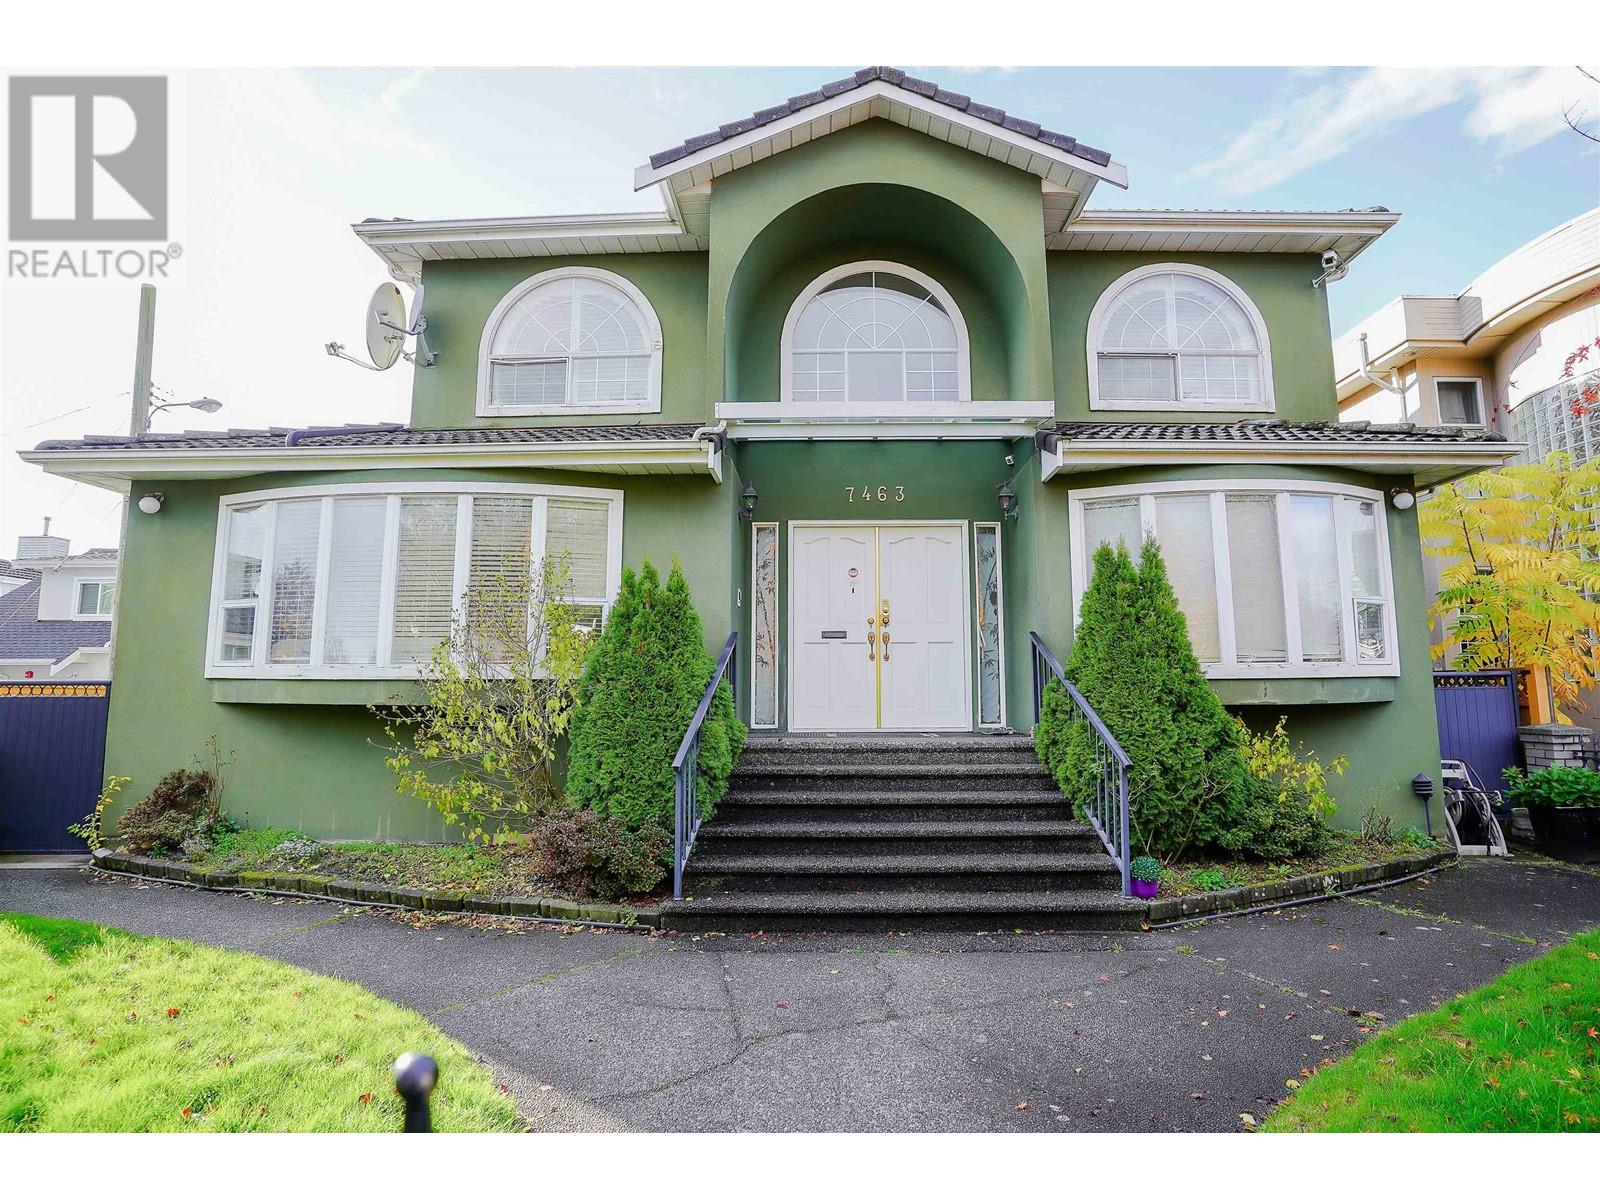 Listing Picture 29 of 34 : 7463 GLADSTONE STREET, Vancouver / 溫哥華 - 魯藝地產 Yvonne Lu Group - MLS Medallion Club Member